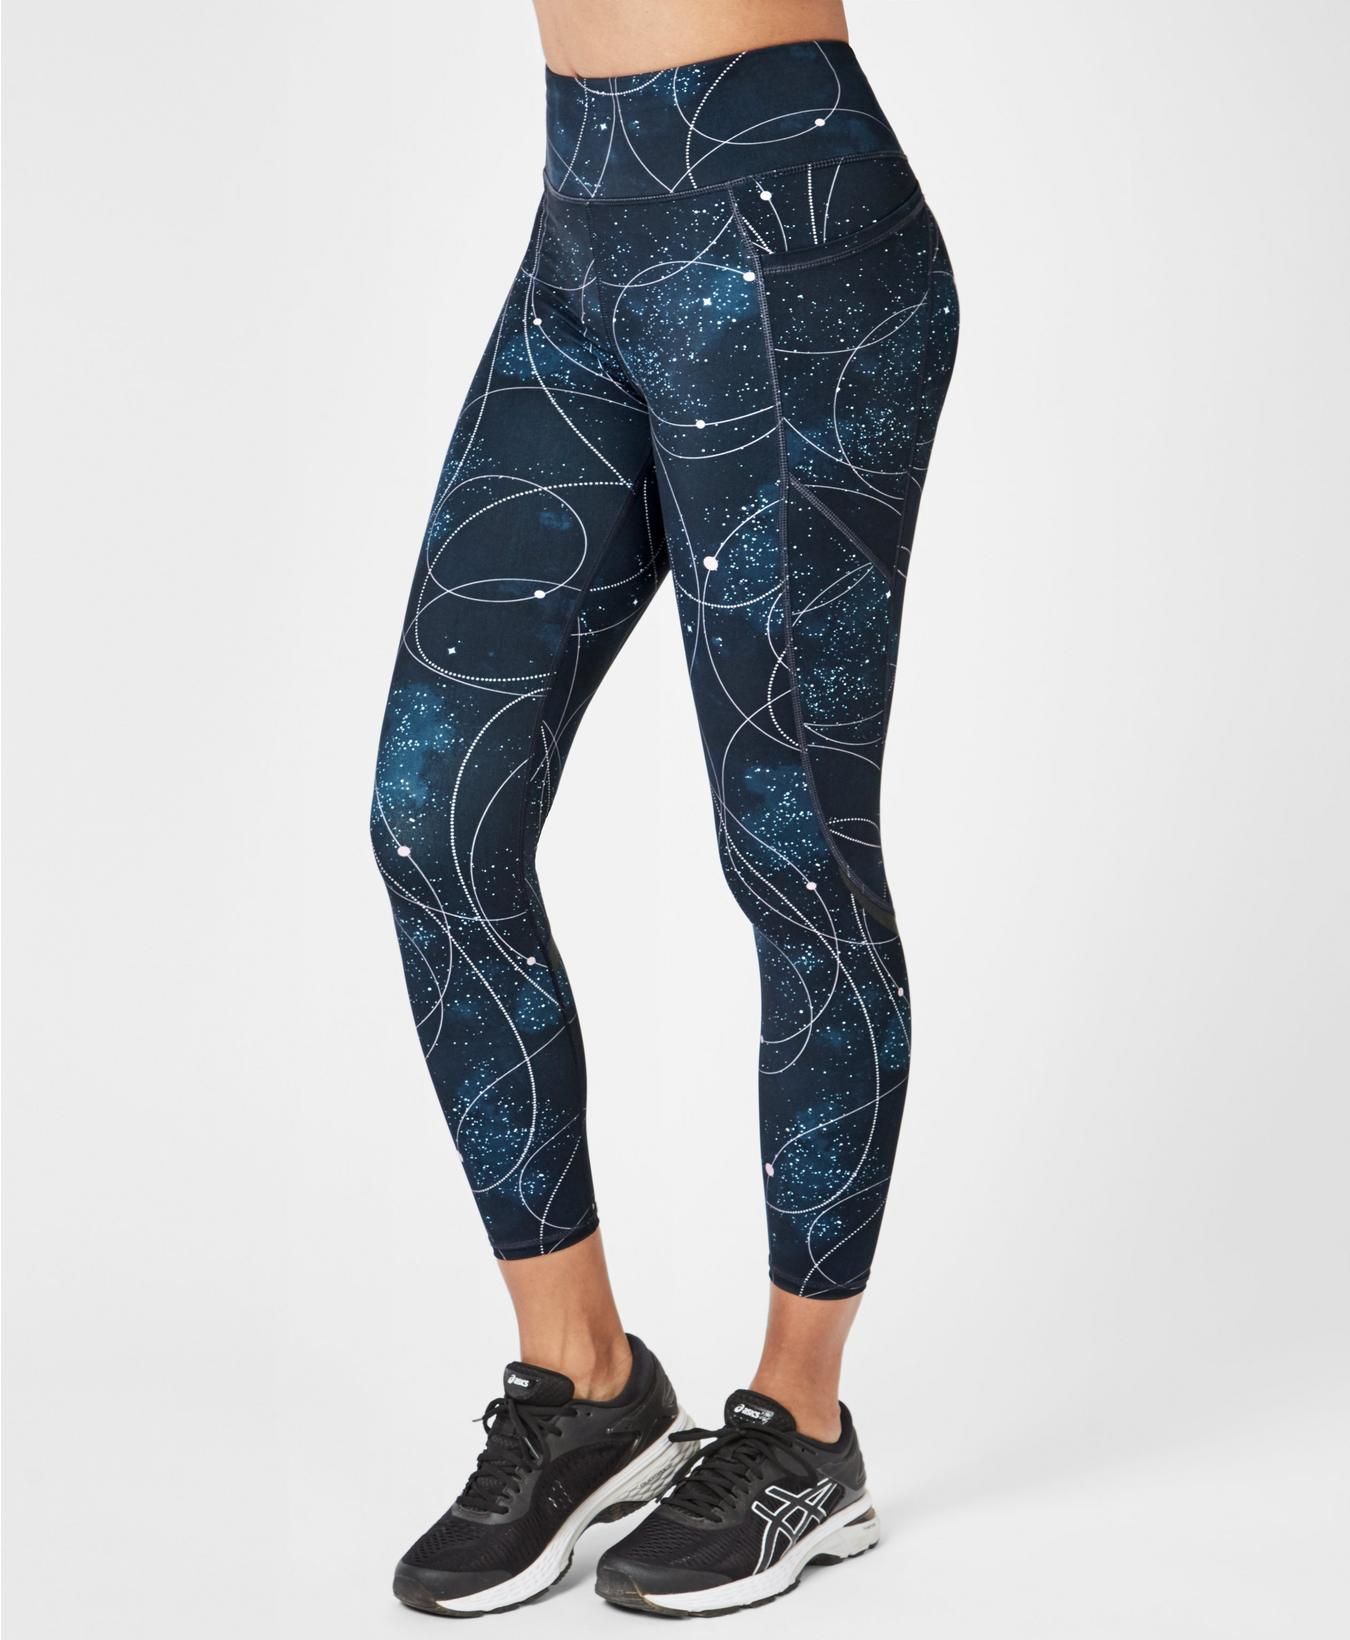 women's cold weather running pants petite